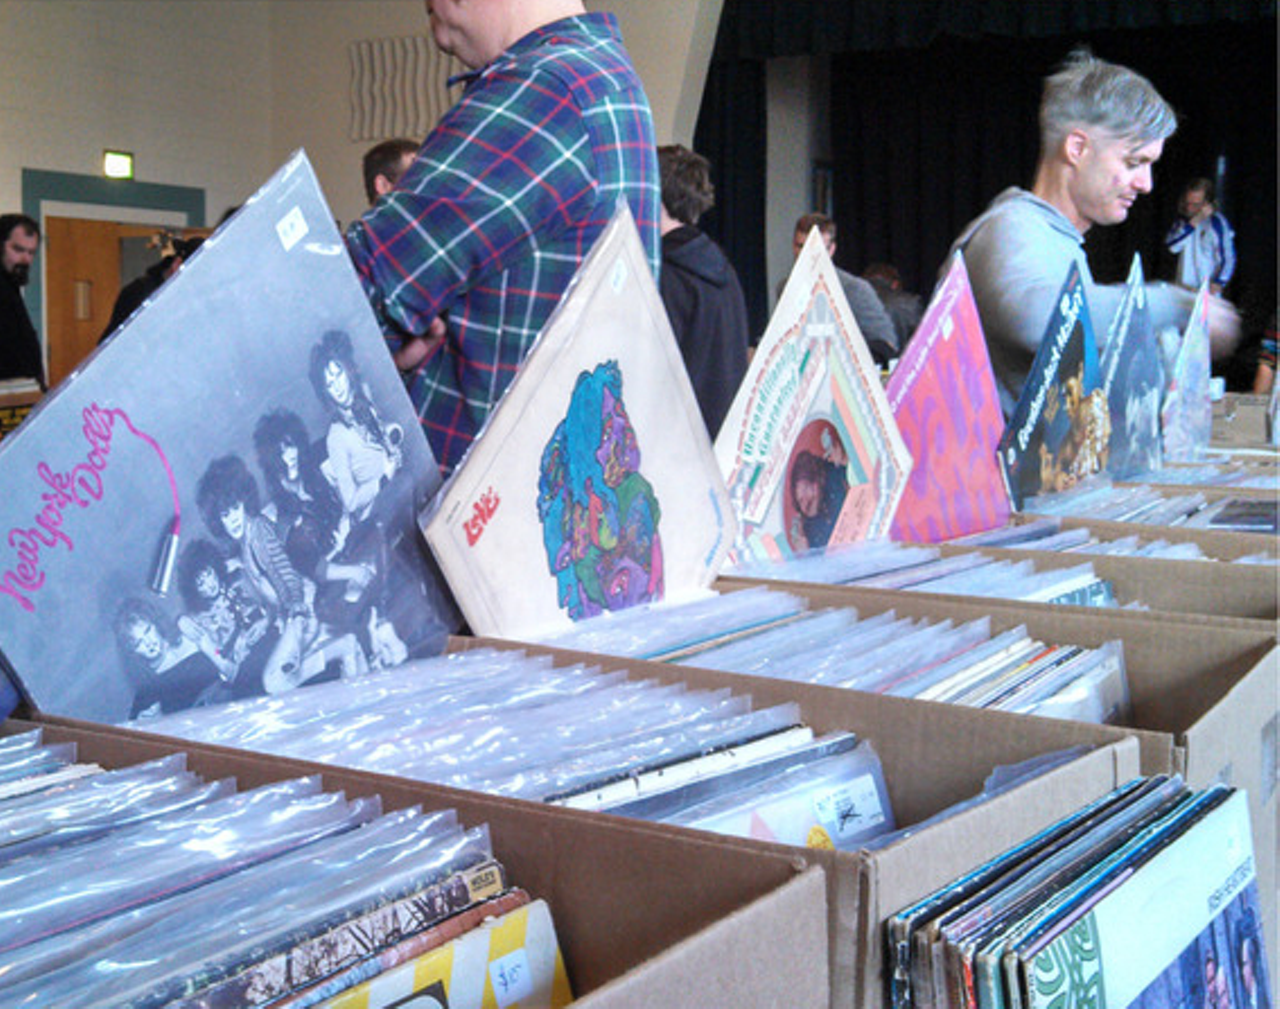 Northside Record Fair
When: Nov. 4 from 11 a.m.-4 p.m.
Where: Heart In Balance Event Center, Northside
What: Bi-annual record fair featuring tons of vendors and rare records. 
Who: Northside Record Fair and Heart of Northside Sponsored by Torn Light Records and Shake It Records
Why: "One of the best record fairs in the midwest." Though this is a self-proclaimed title, most anyone would agree.